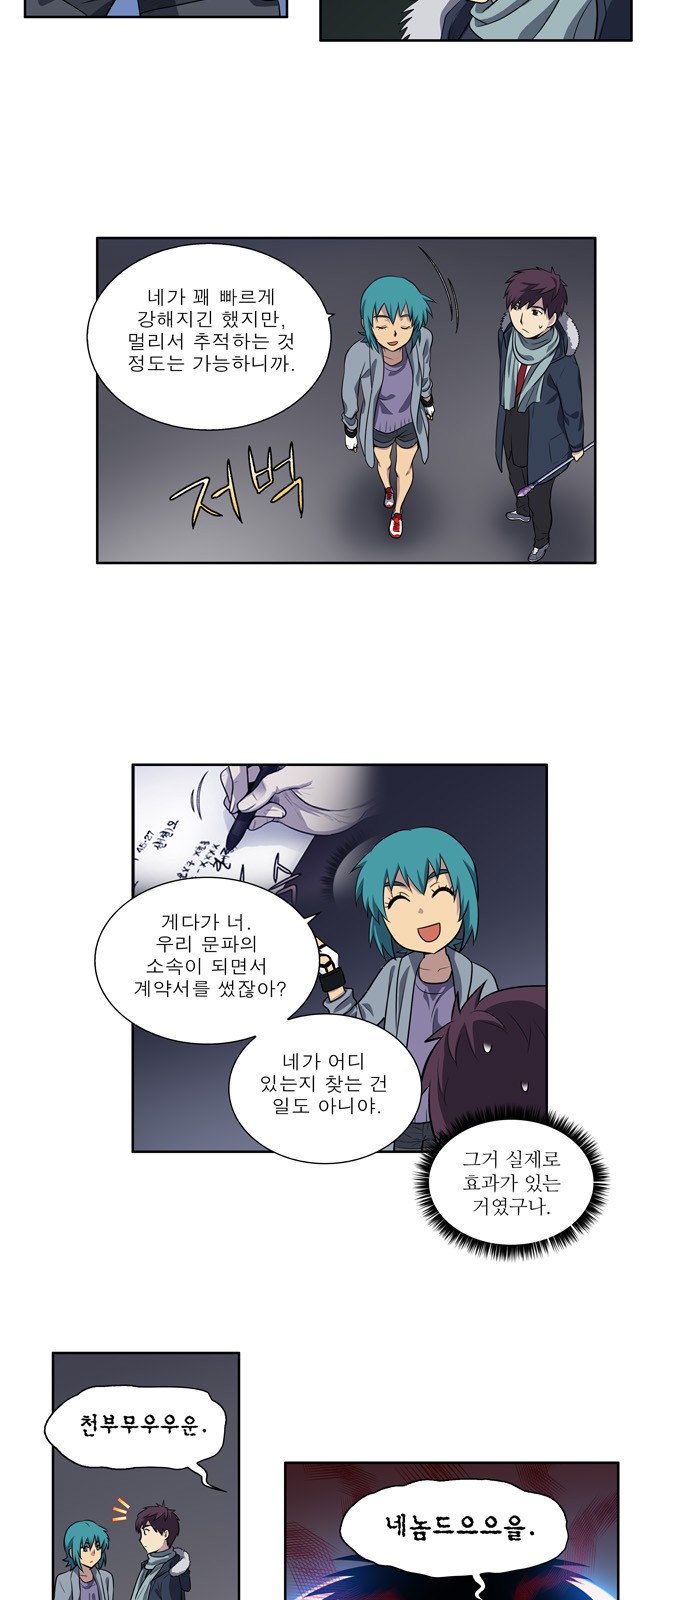 The Gamer - Chapter 167 - Page 2